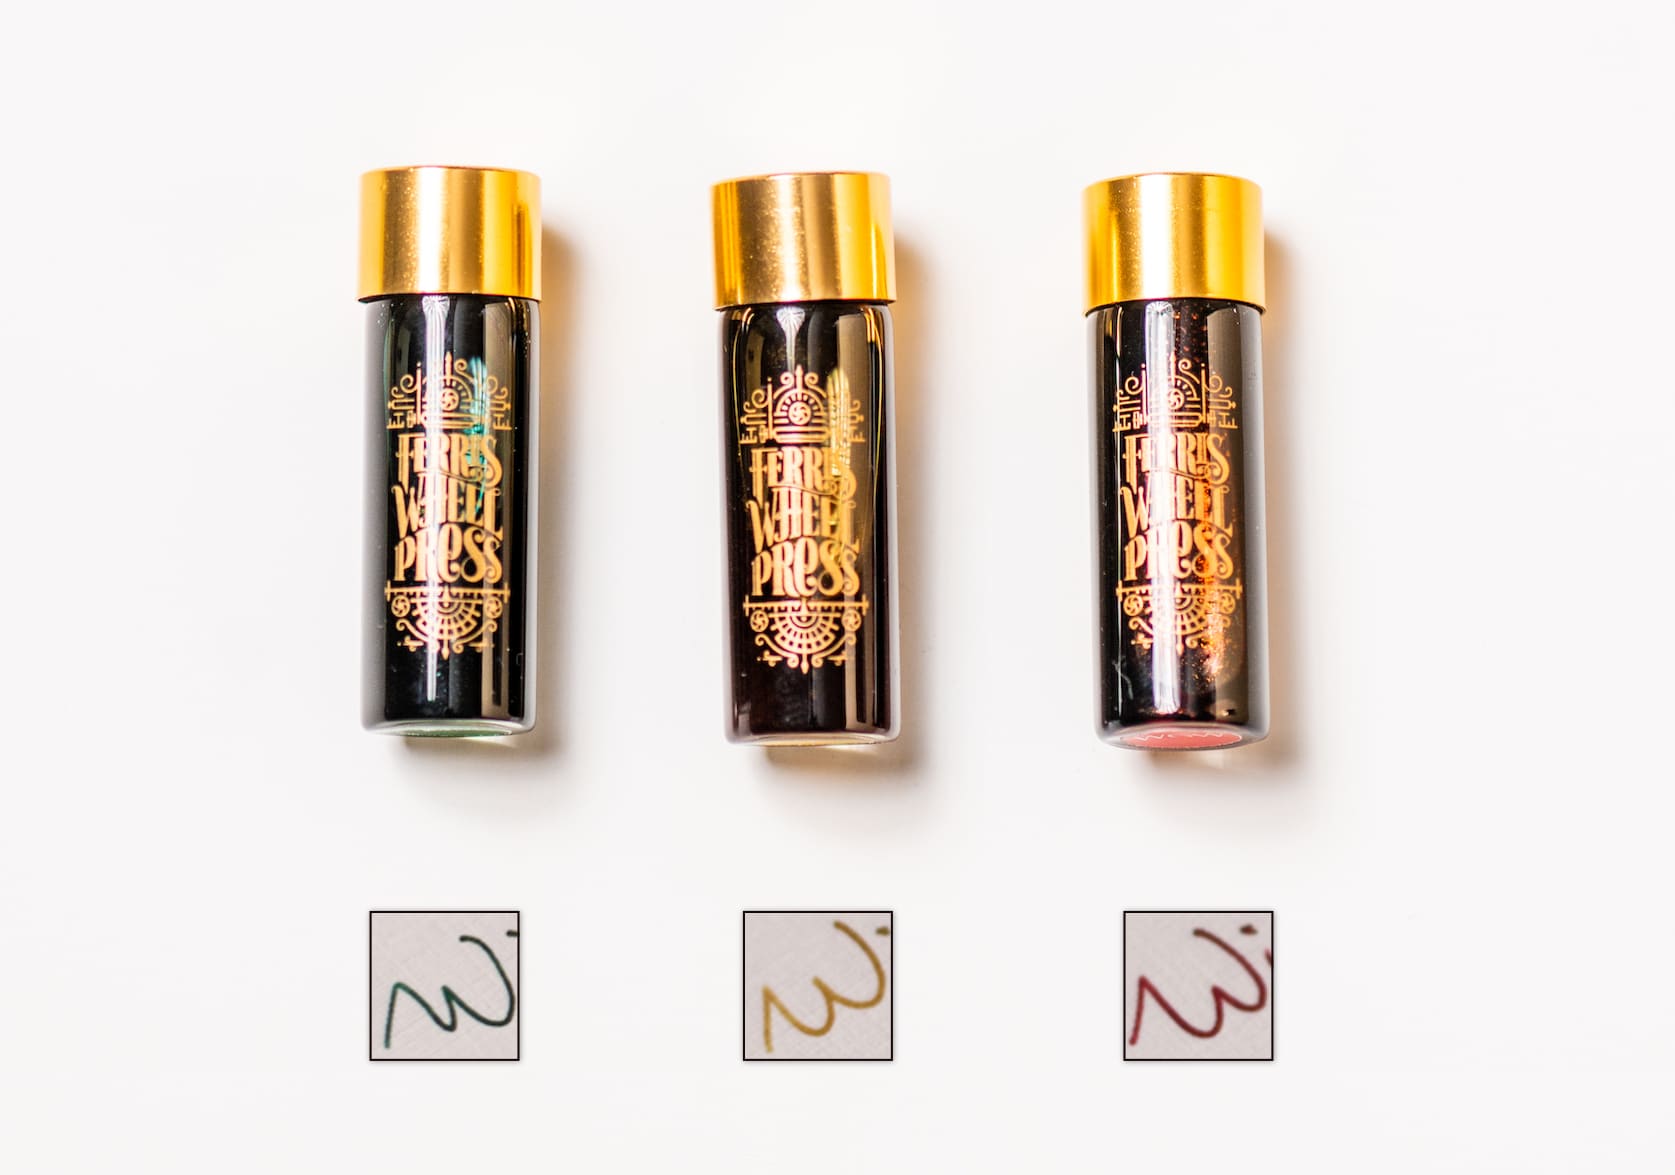 Three vials of ink centered against a white background. Below each vial is a square with "W" written inside it, in the three different colours of the vials: mistletoe, champagne, winterberry.